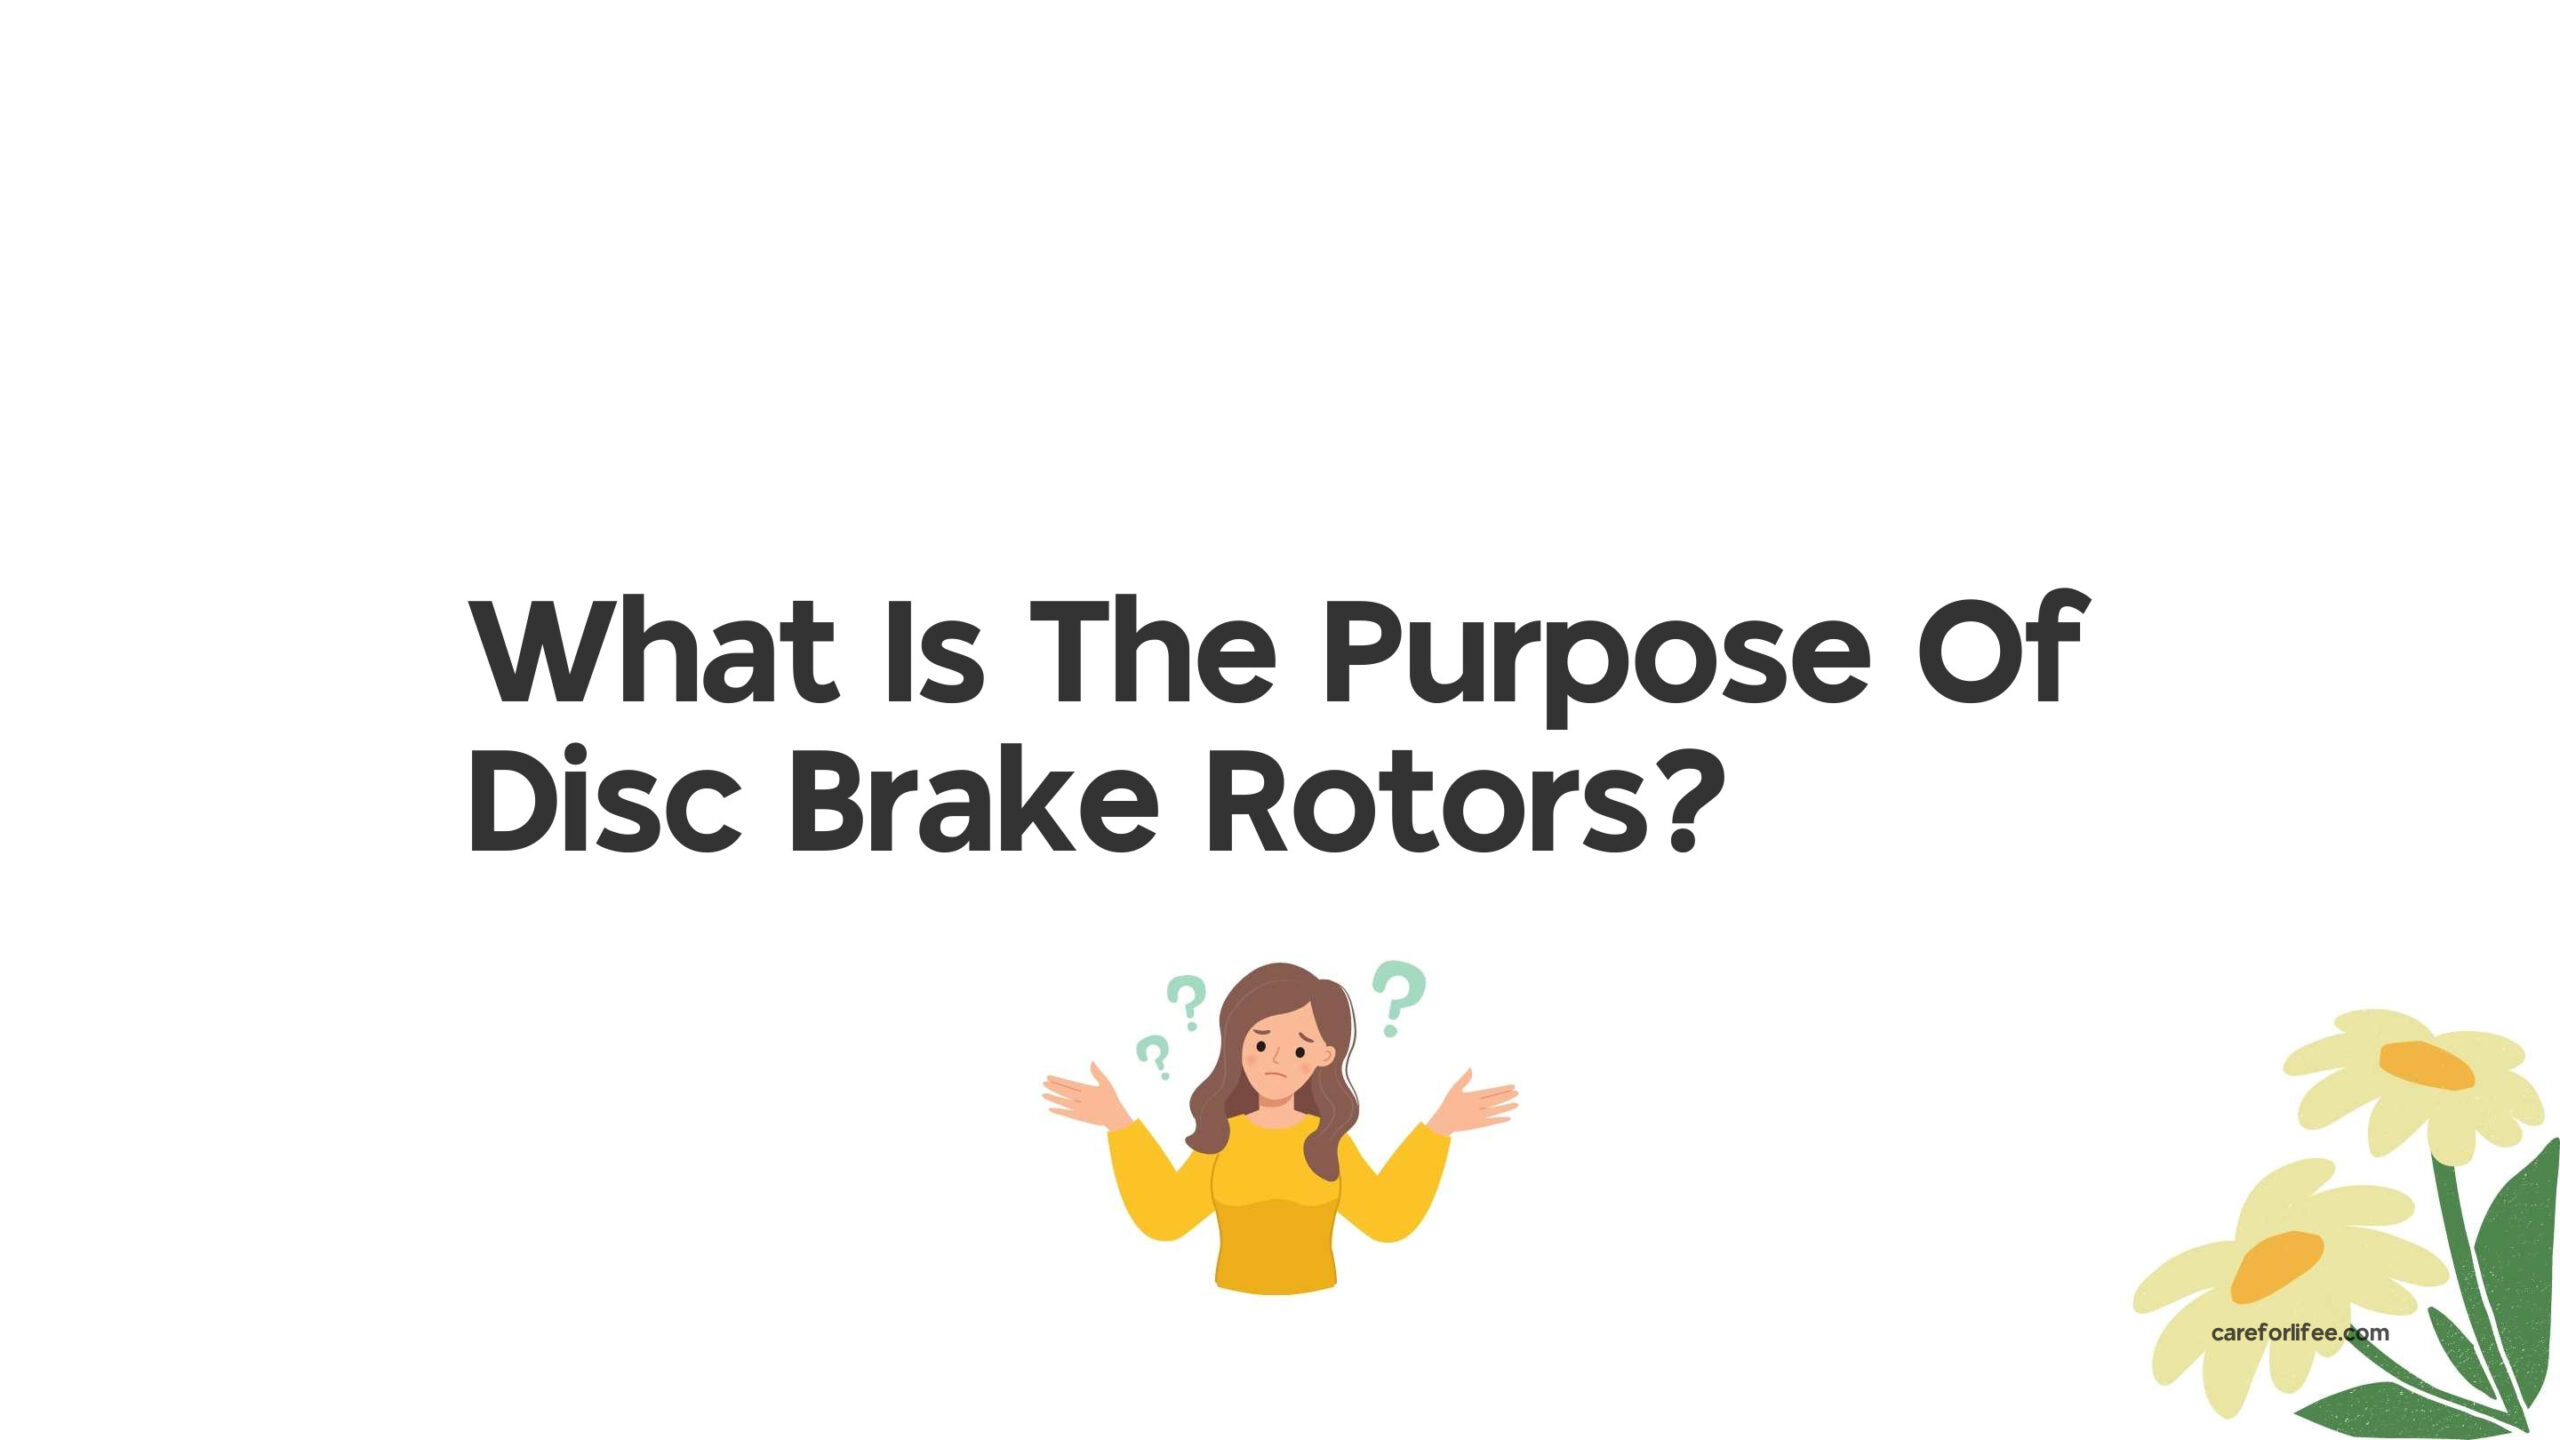 What Is The Purpose Of Disc Brake Rotors?